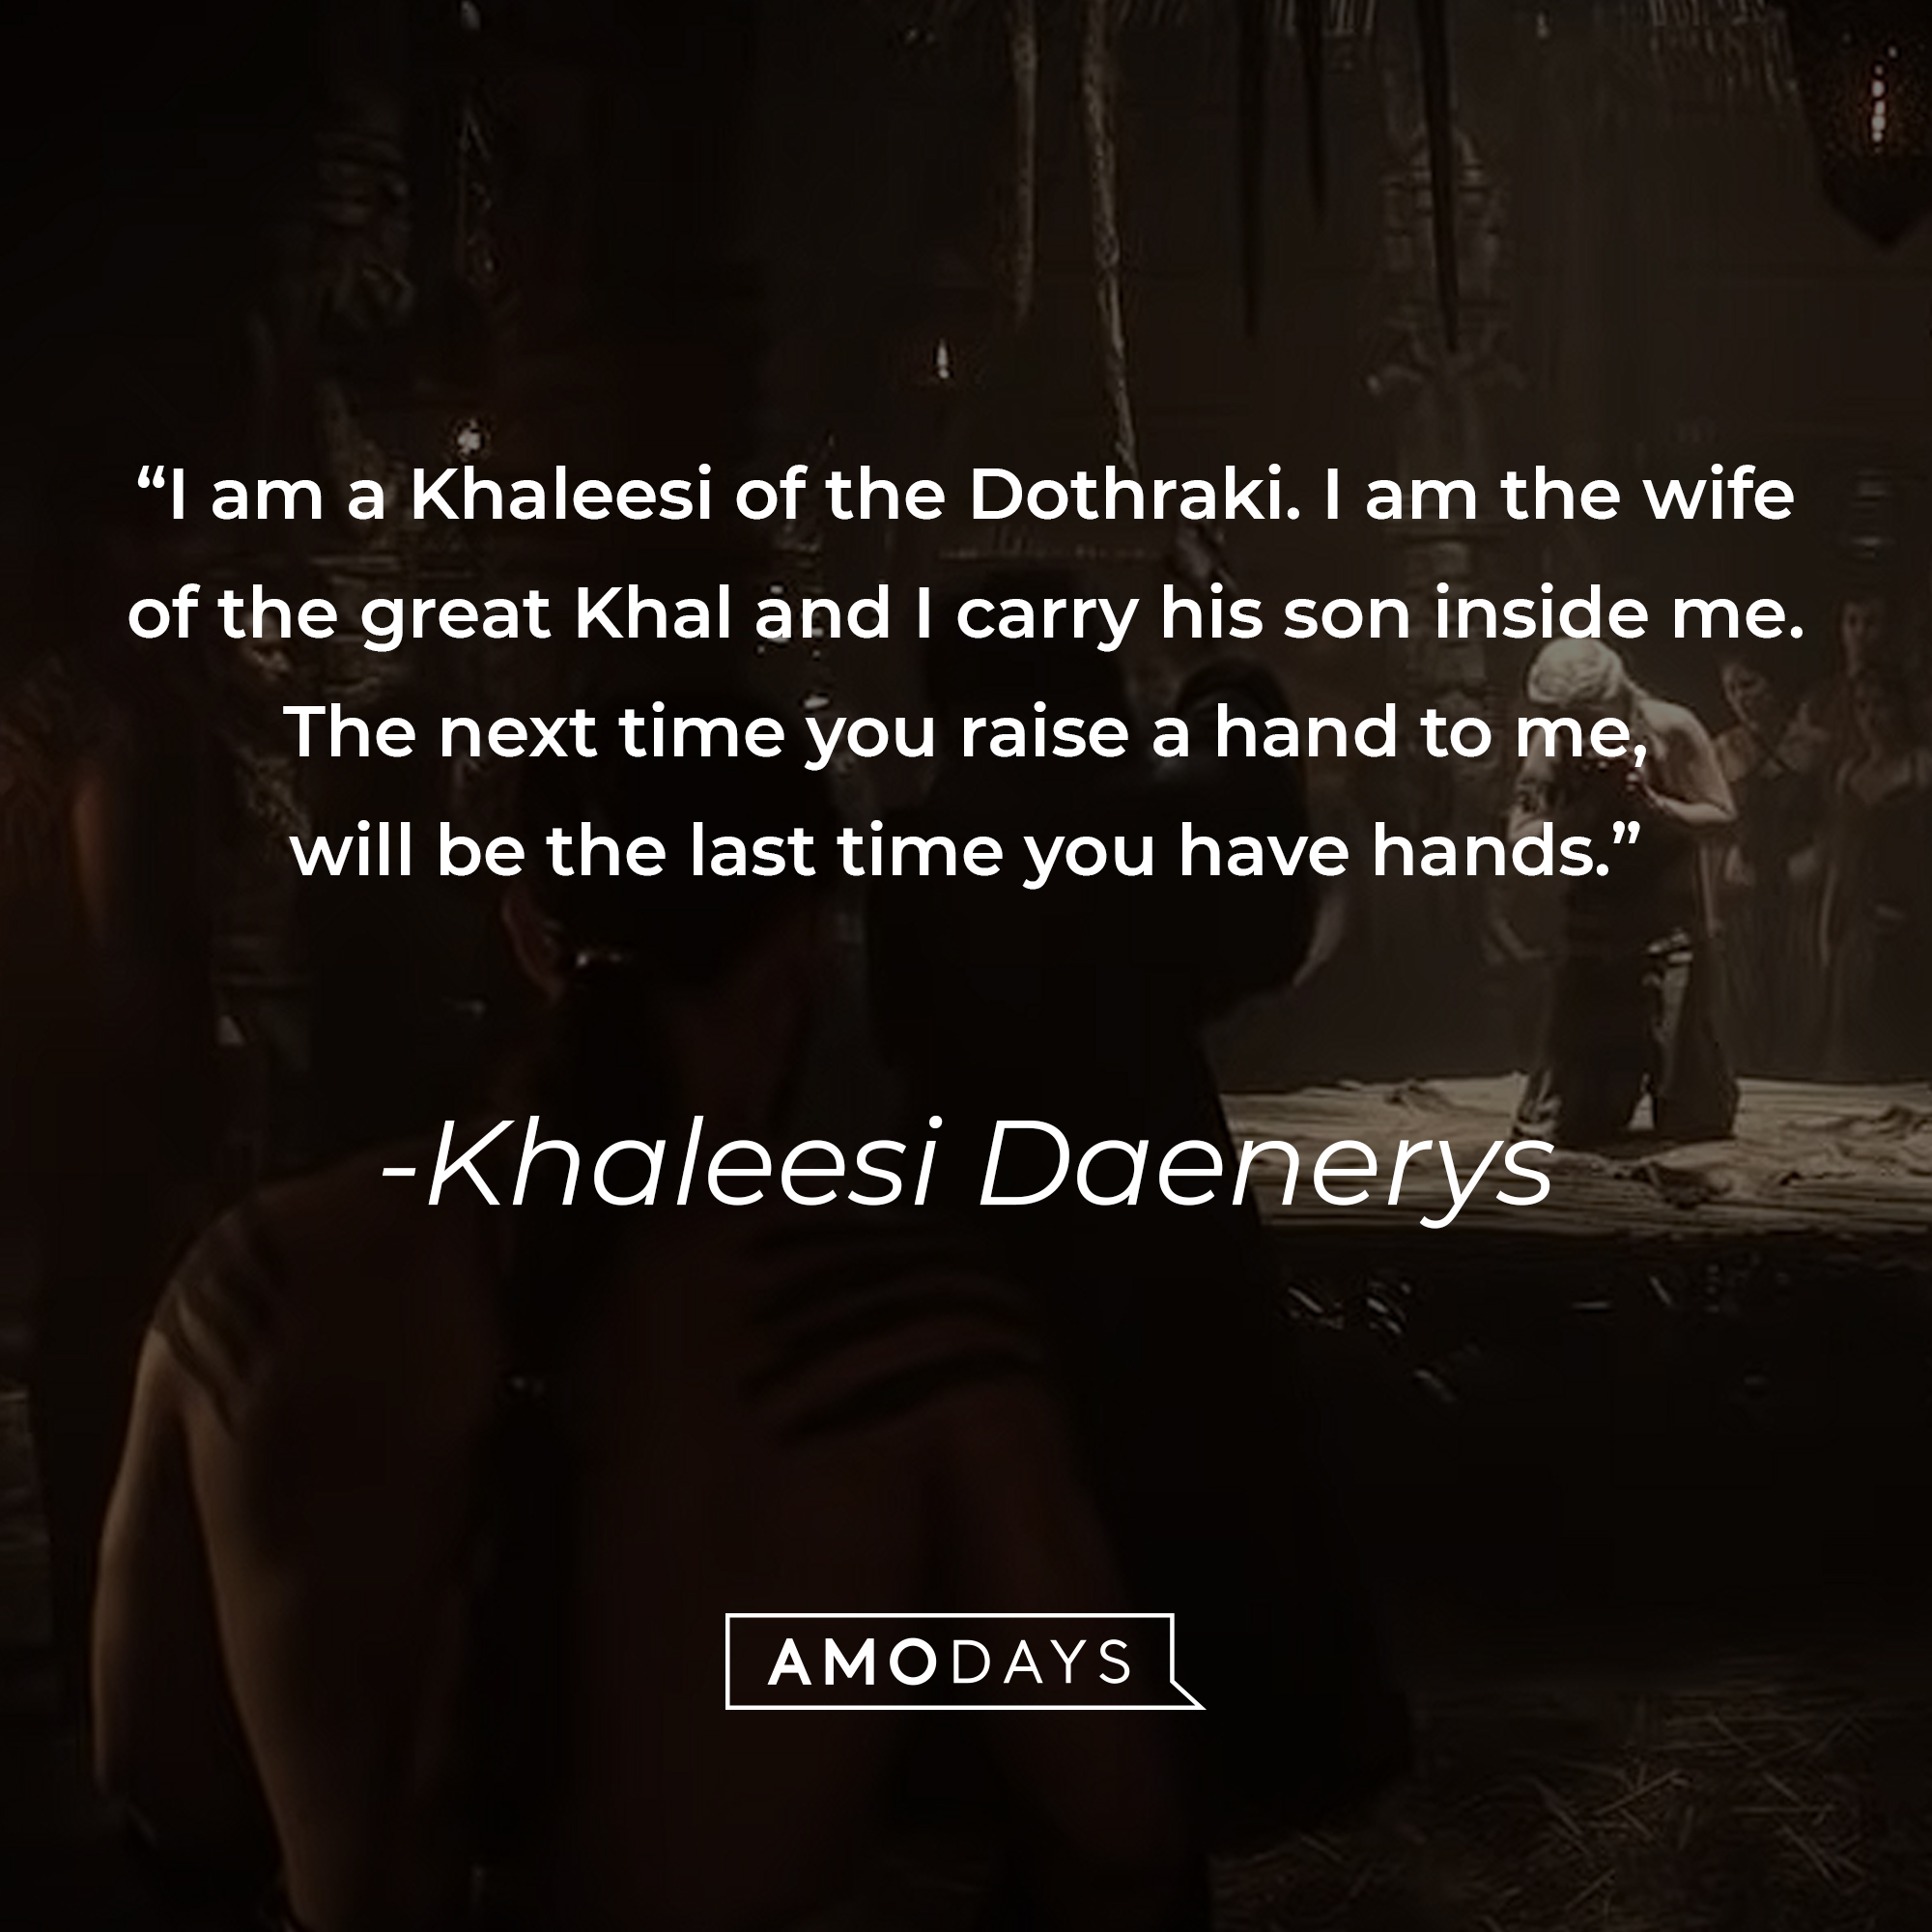 Khaleesi Daenerys's quote: "I am a Khaleesi of the Dothraki. I am the wife of the great Khal and I carry his son inside me. The next time you raise a hand to me, will be the last time you have hands." | Source: youtube.com/gameofthrones